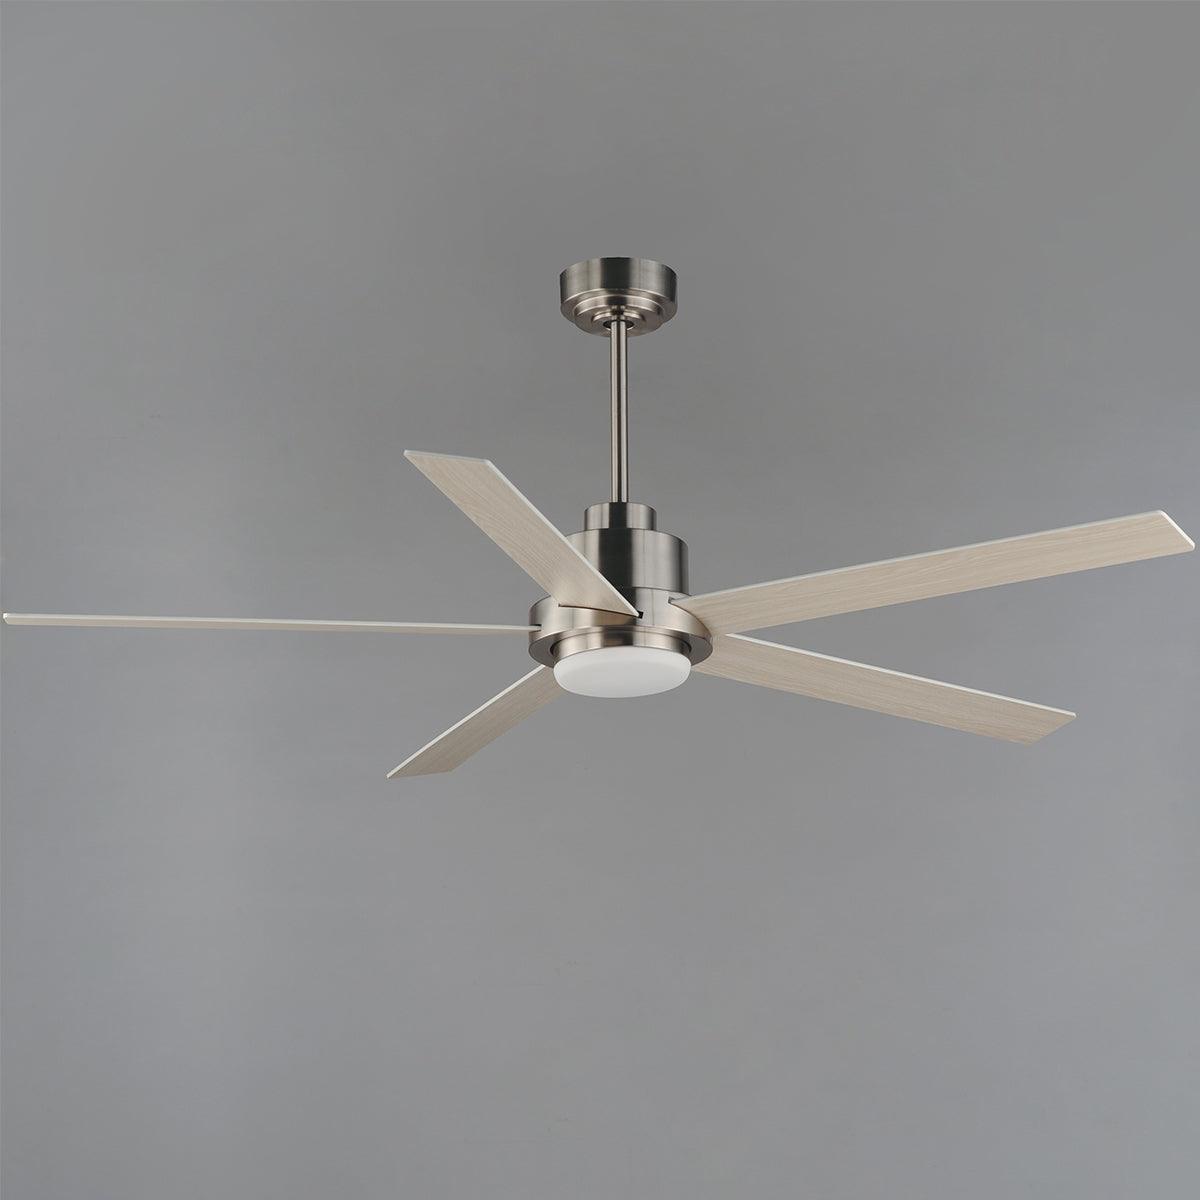 Daisy 60 Inch 5-Blade Ceiling Fan With Light and Wall Control, White,Satin Nickel with White/Walnut Blades - Bees Lighting